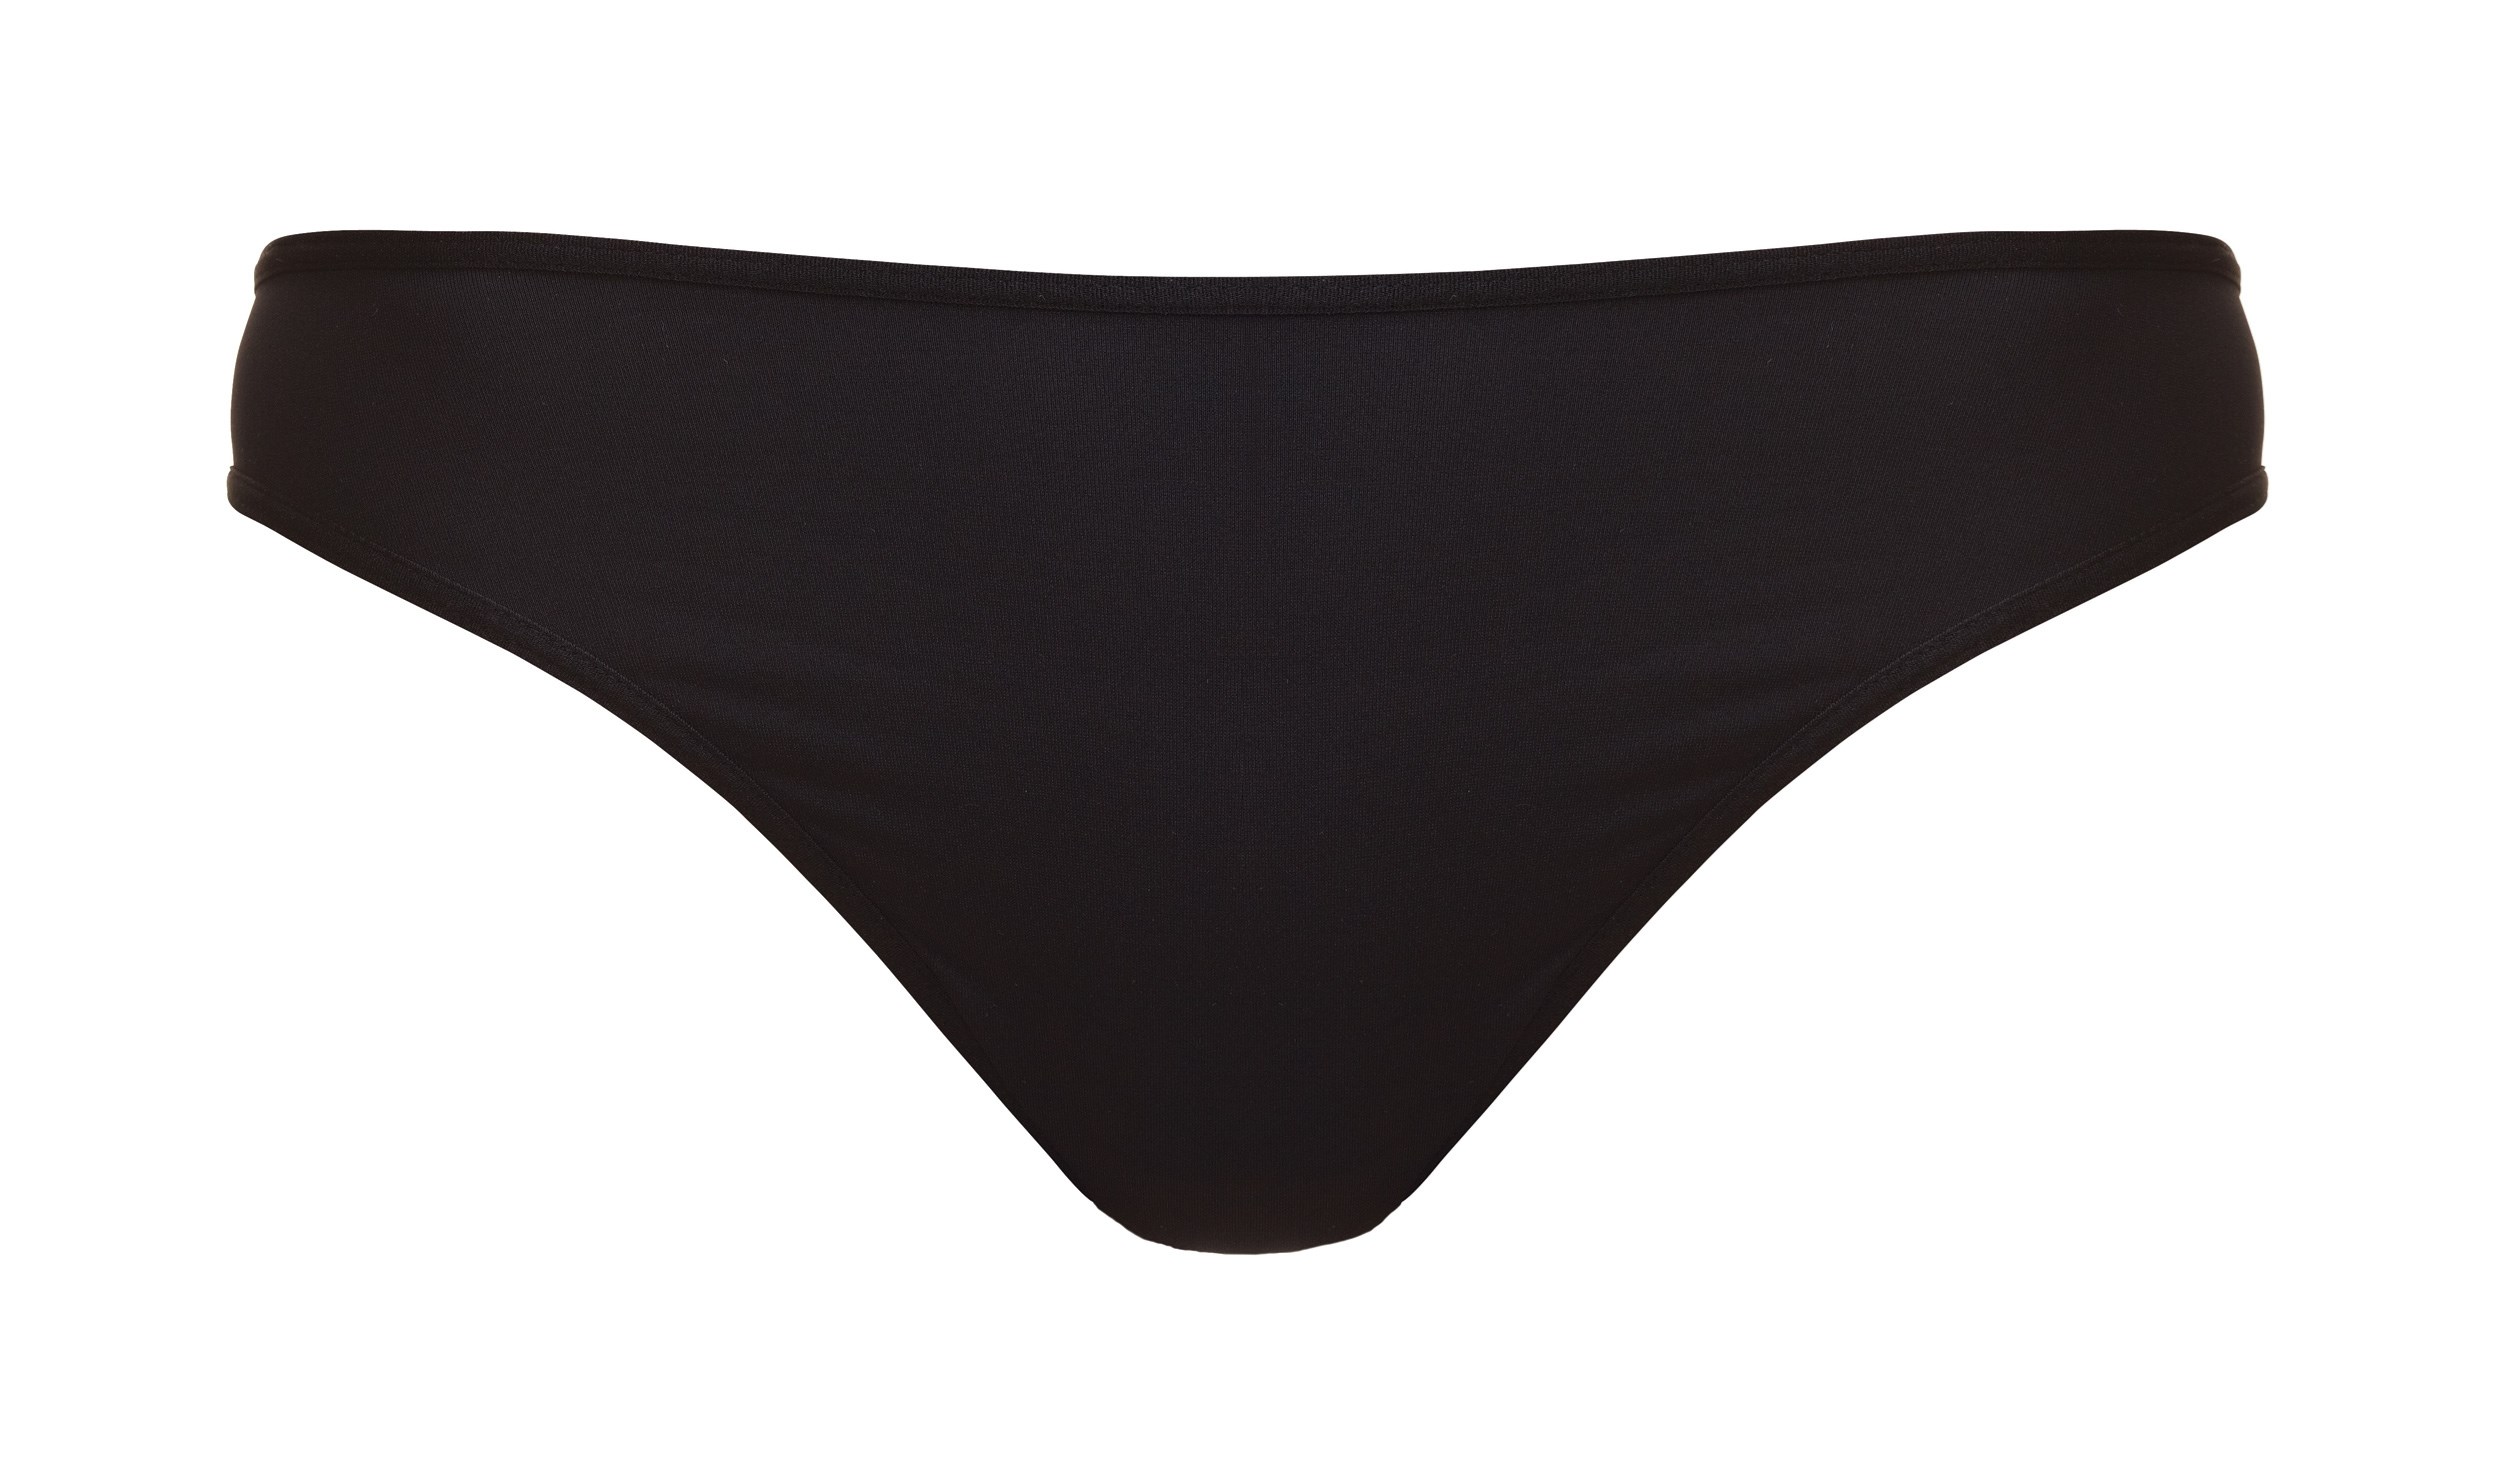 Leading Strings 7cm Thong - Strictly Black